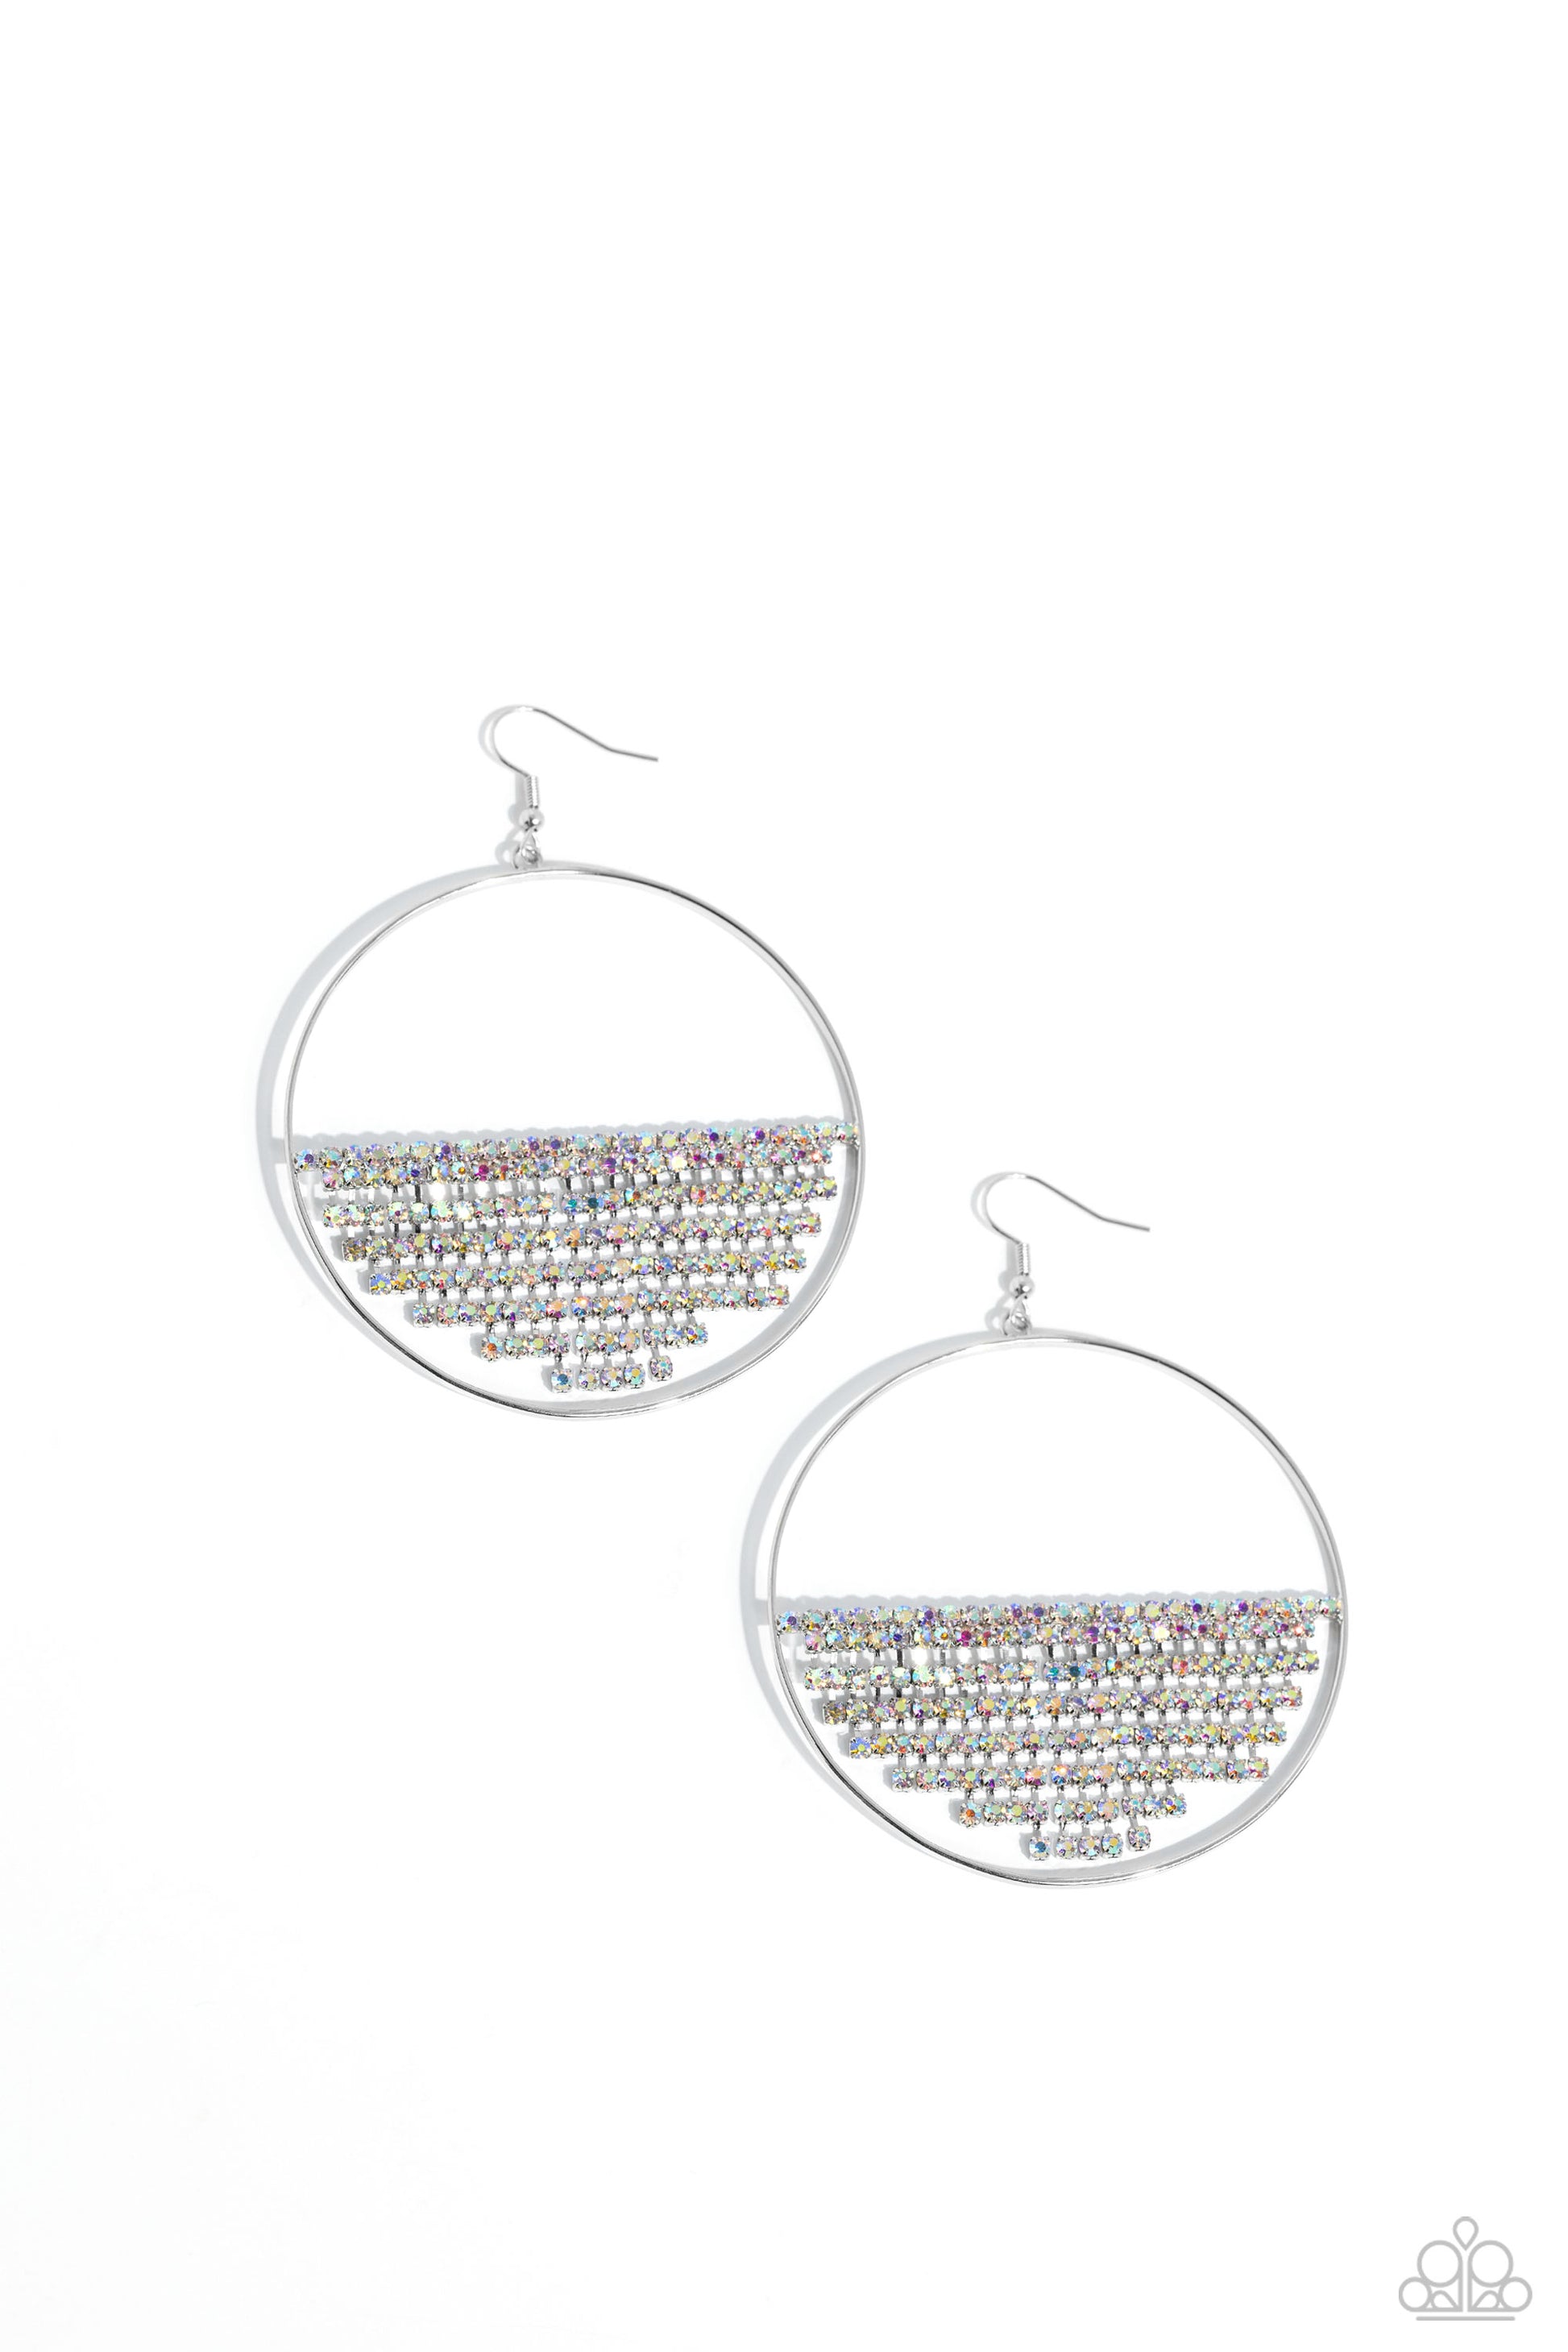 Paparazzi Accessories - Fierce Fringe - Multi Earrings a curtain of iridescent rhinestones is stretched between the edges of a skinny, oversized silver hoop, creating a shimmering display. The rhinestones taper towards the center as they sway and cascade, adding sparkly movement for a fierce industrial finish. Earring attaches to a standard fishhook fitting. Due to its prismatic palette, color may vary.  Sold as one pair of earrings.